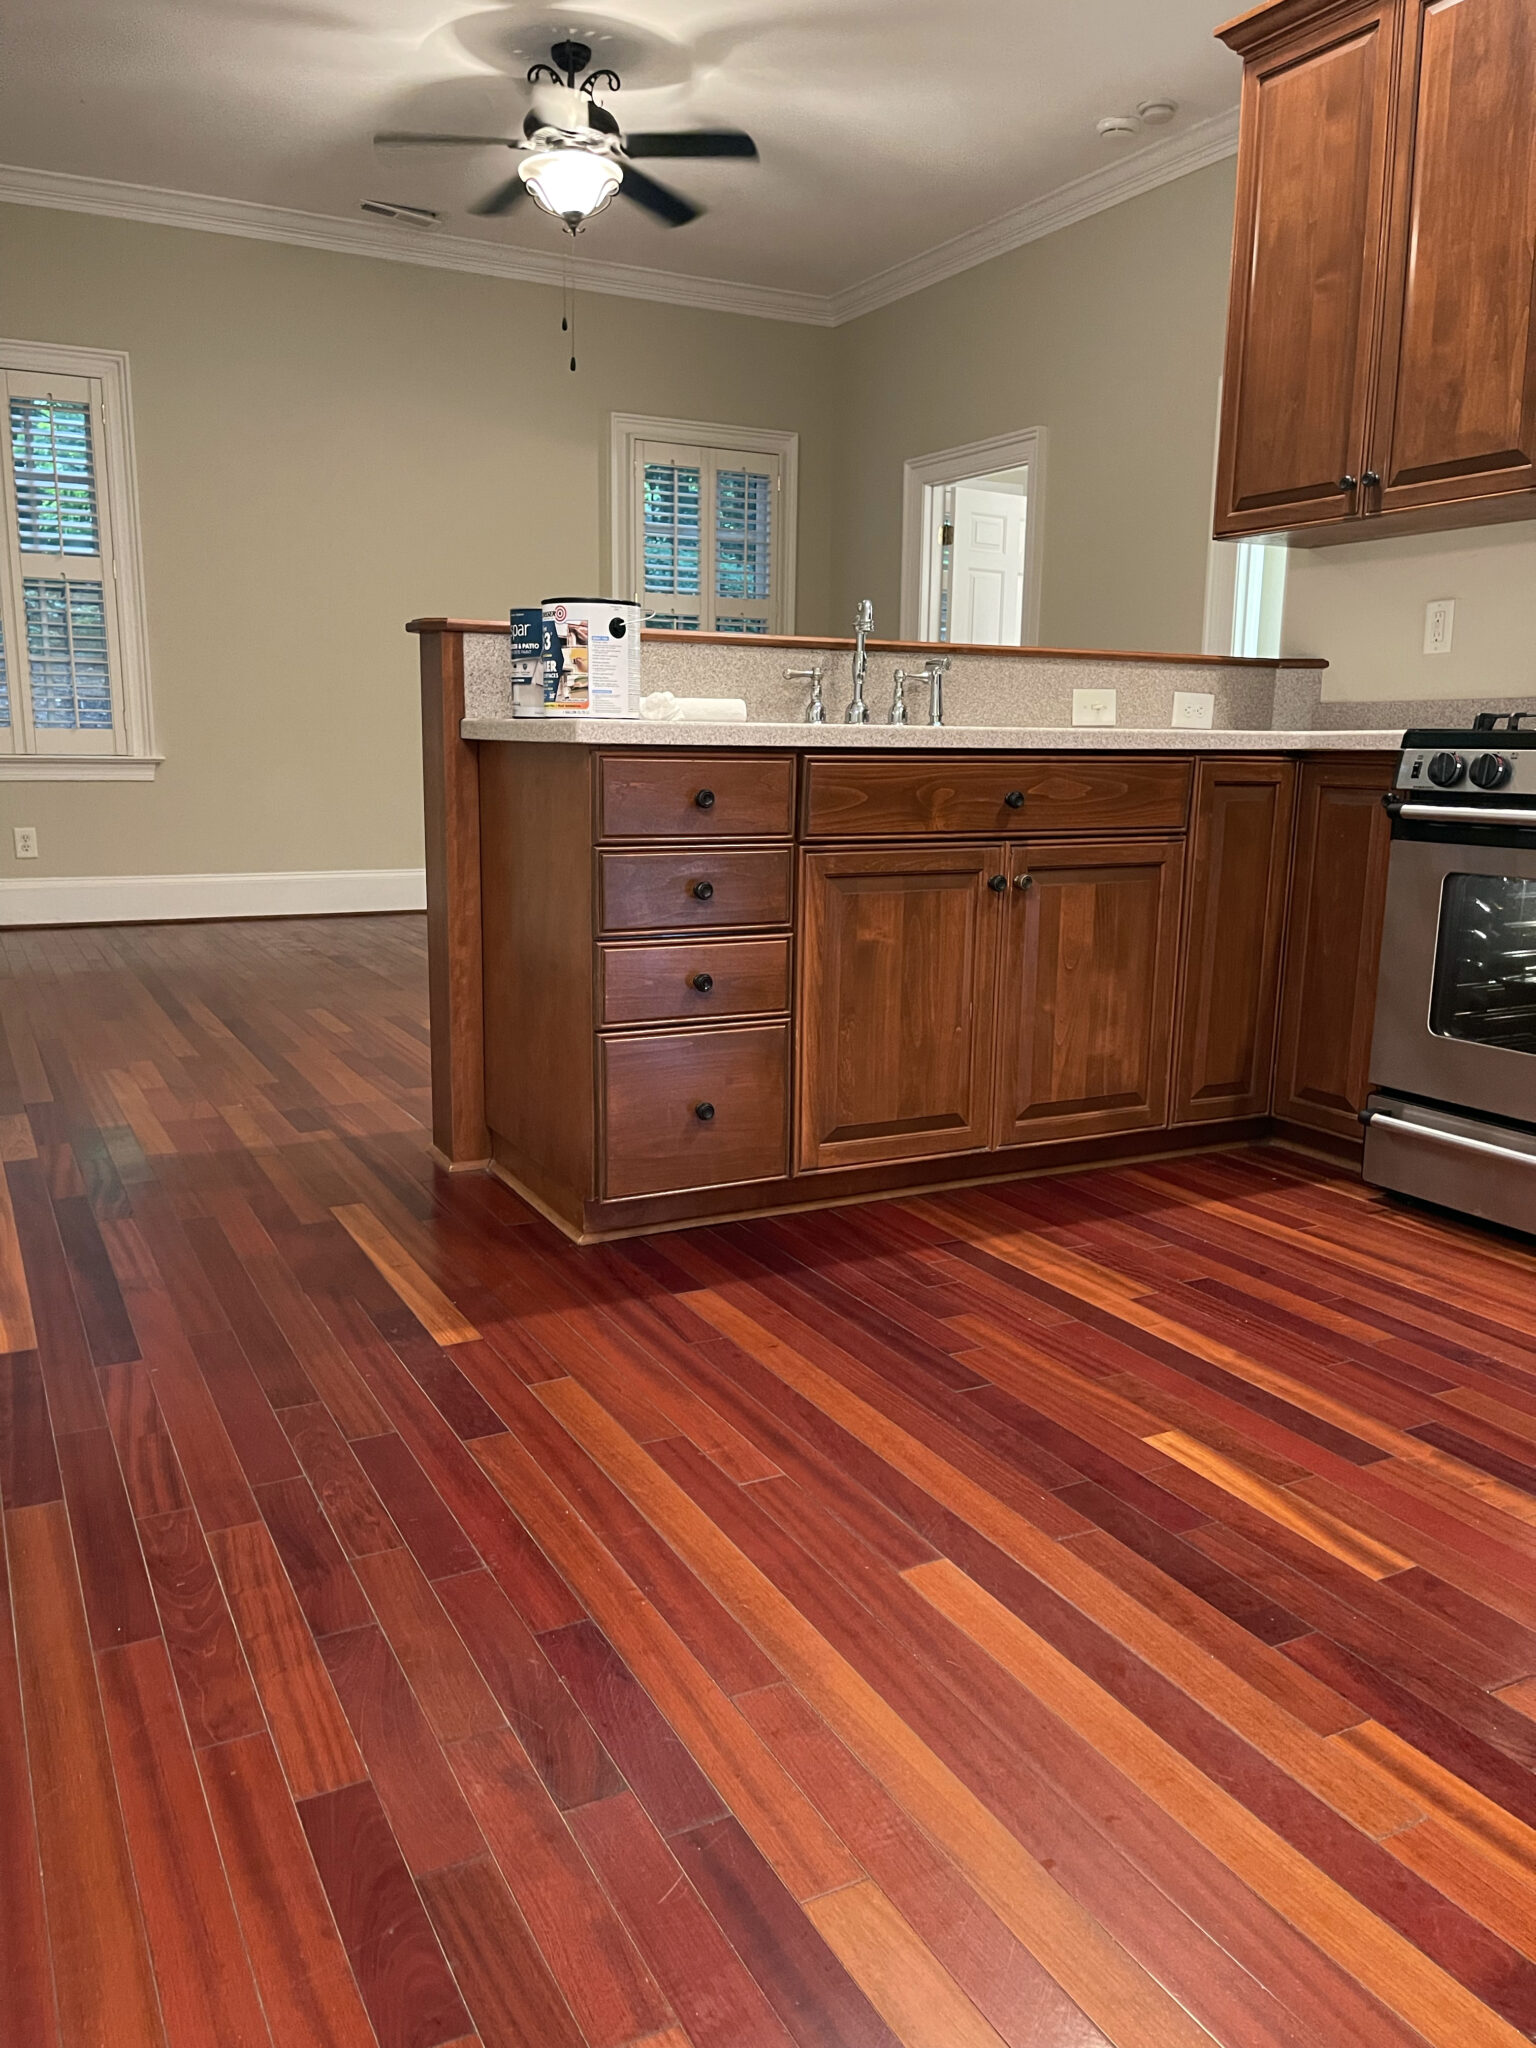 When Is It Better To Paint Wood Flooring?